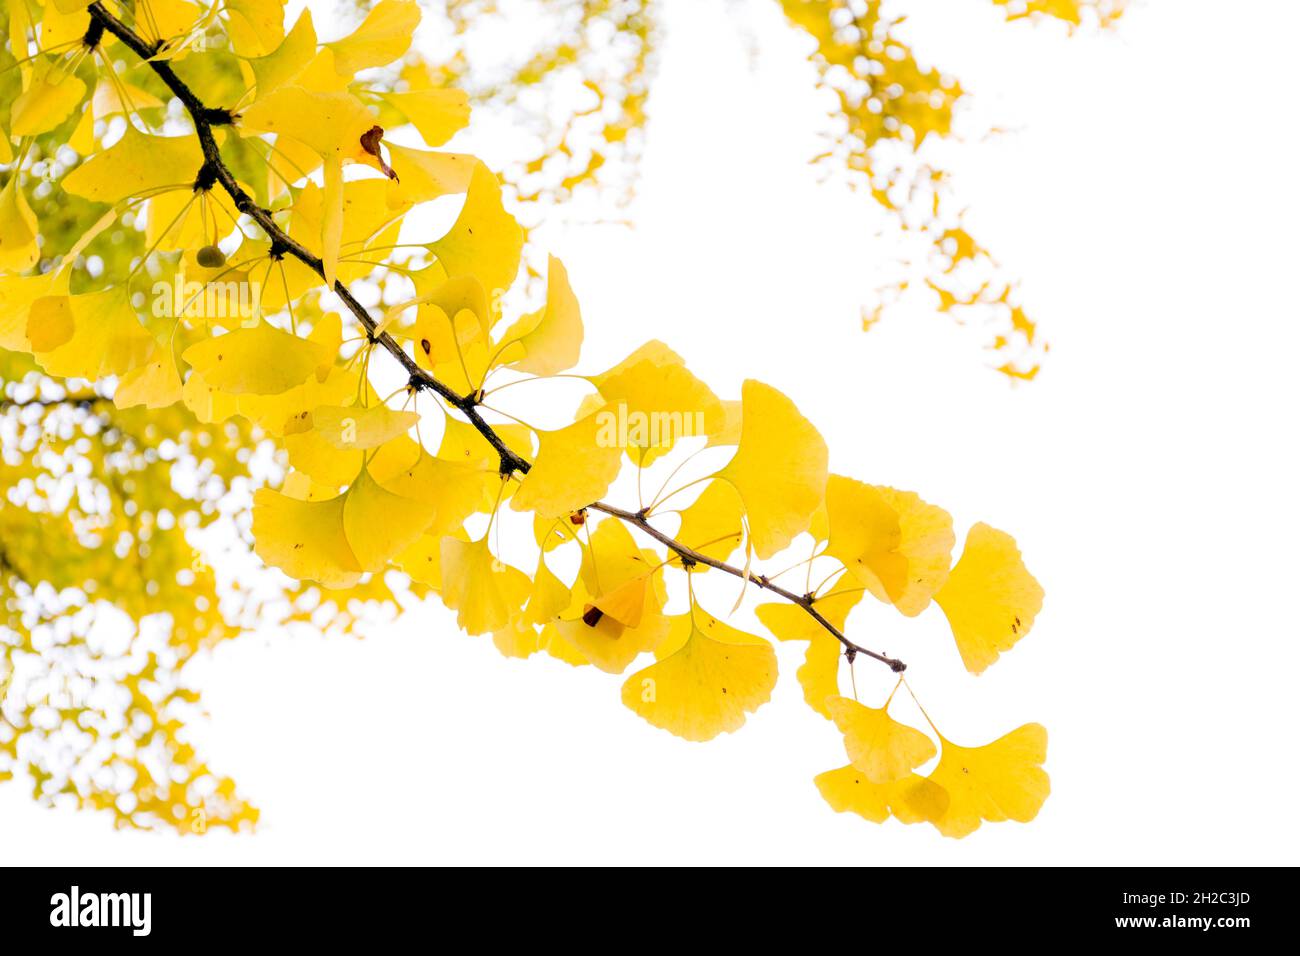 maidenhair tree, Ginkgo Tree, Gingko Tree, Ginko Tree (Ginkgo biloba), Twig with autumn leaves and seeds in front of white background, Germany, Stock Photo